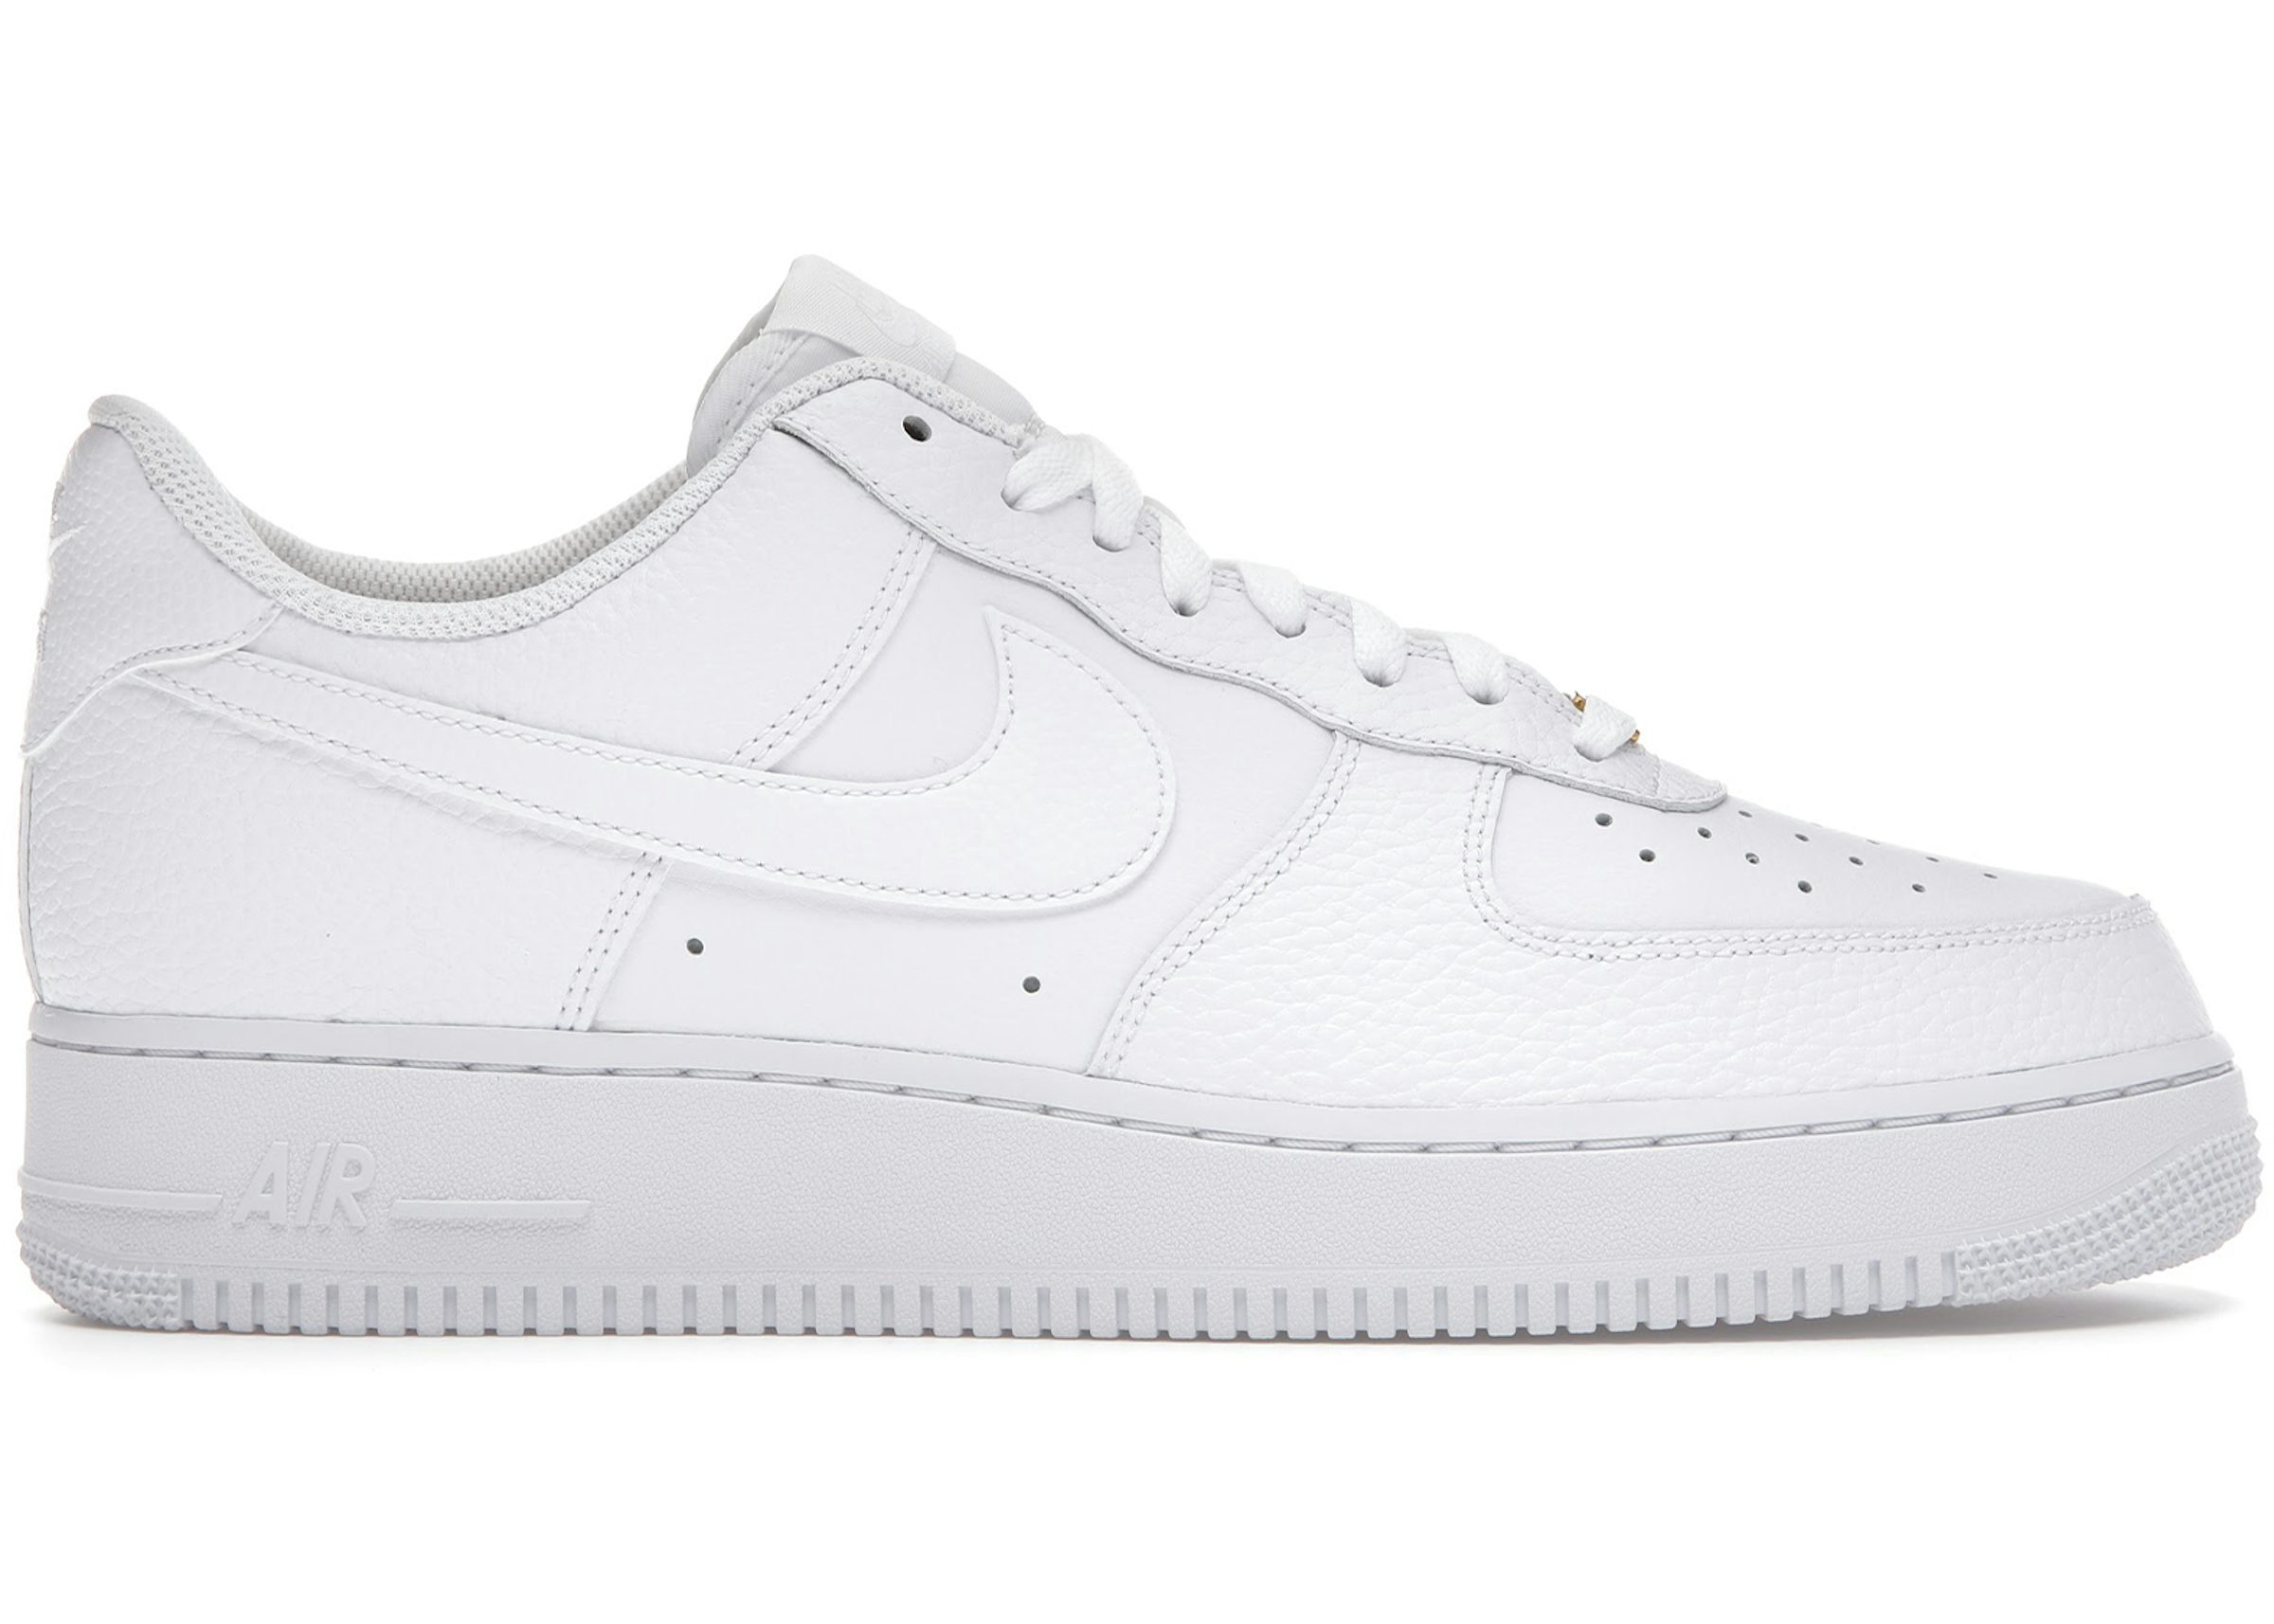 Air Force 1 Low Triple White Tumbled Leather Men's - CZ0326-101 US